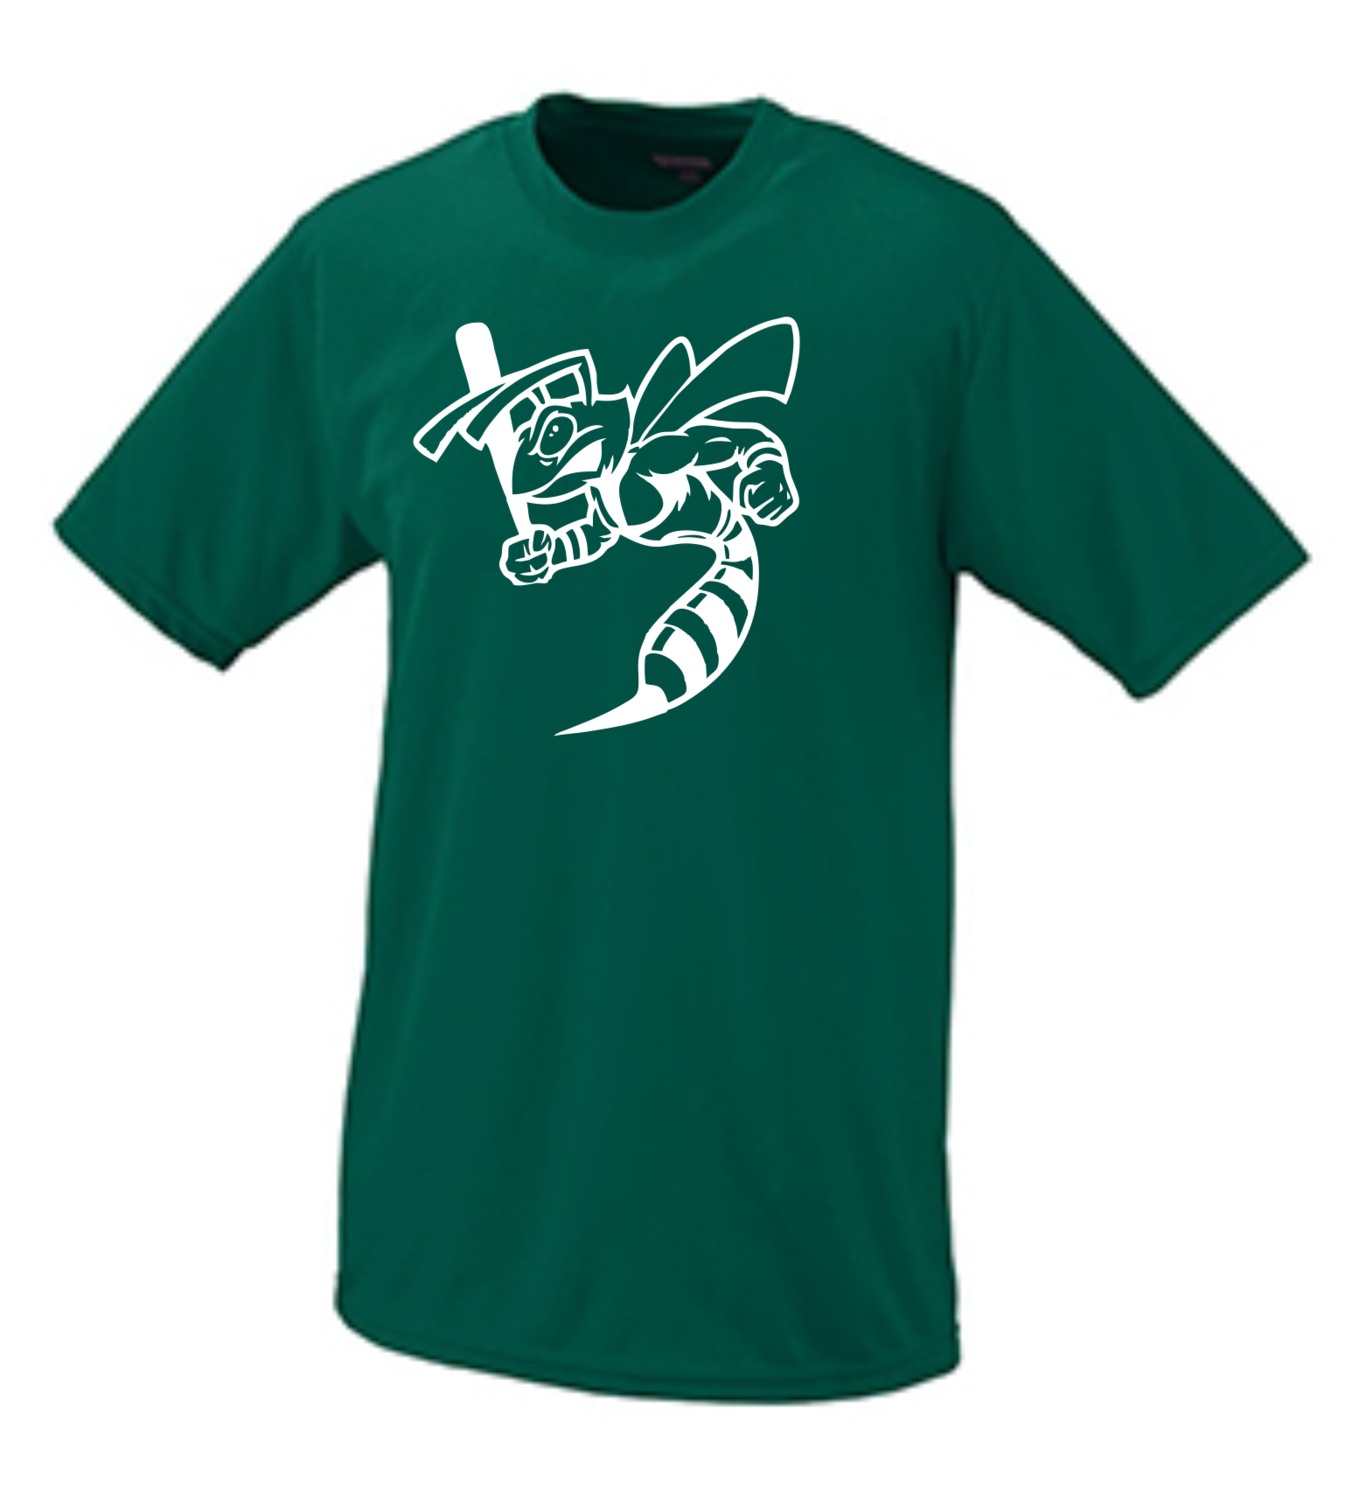 Short Sleeve Performance T-Shirt w/ Name & Number (Optional) - Adult & Youth - 2 Colors Available